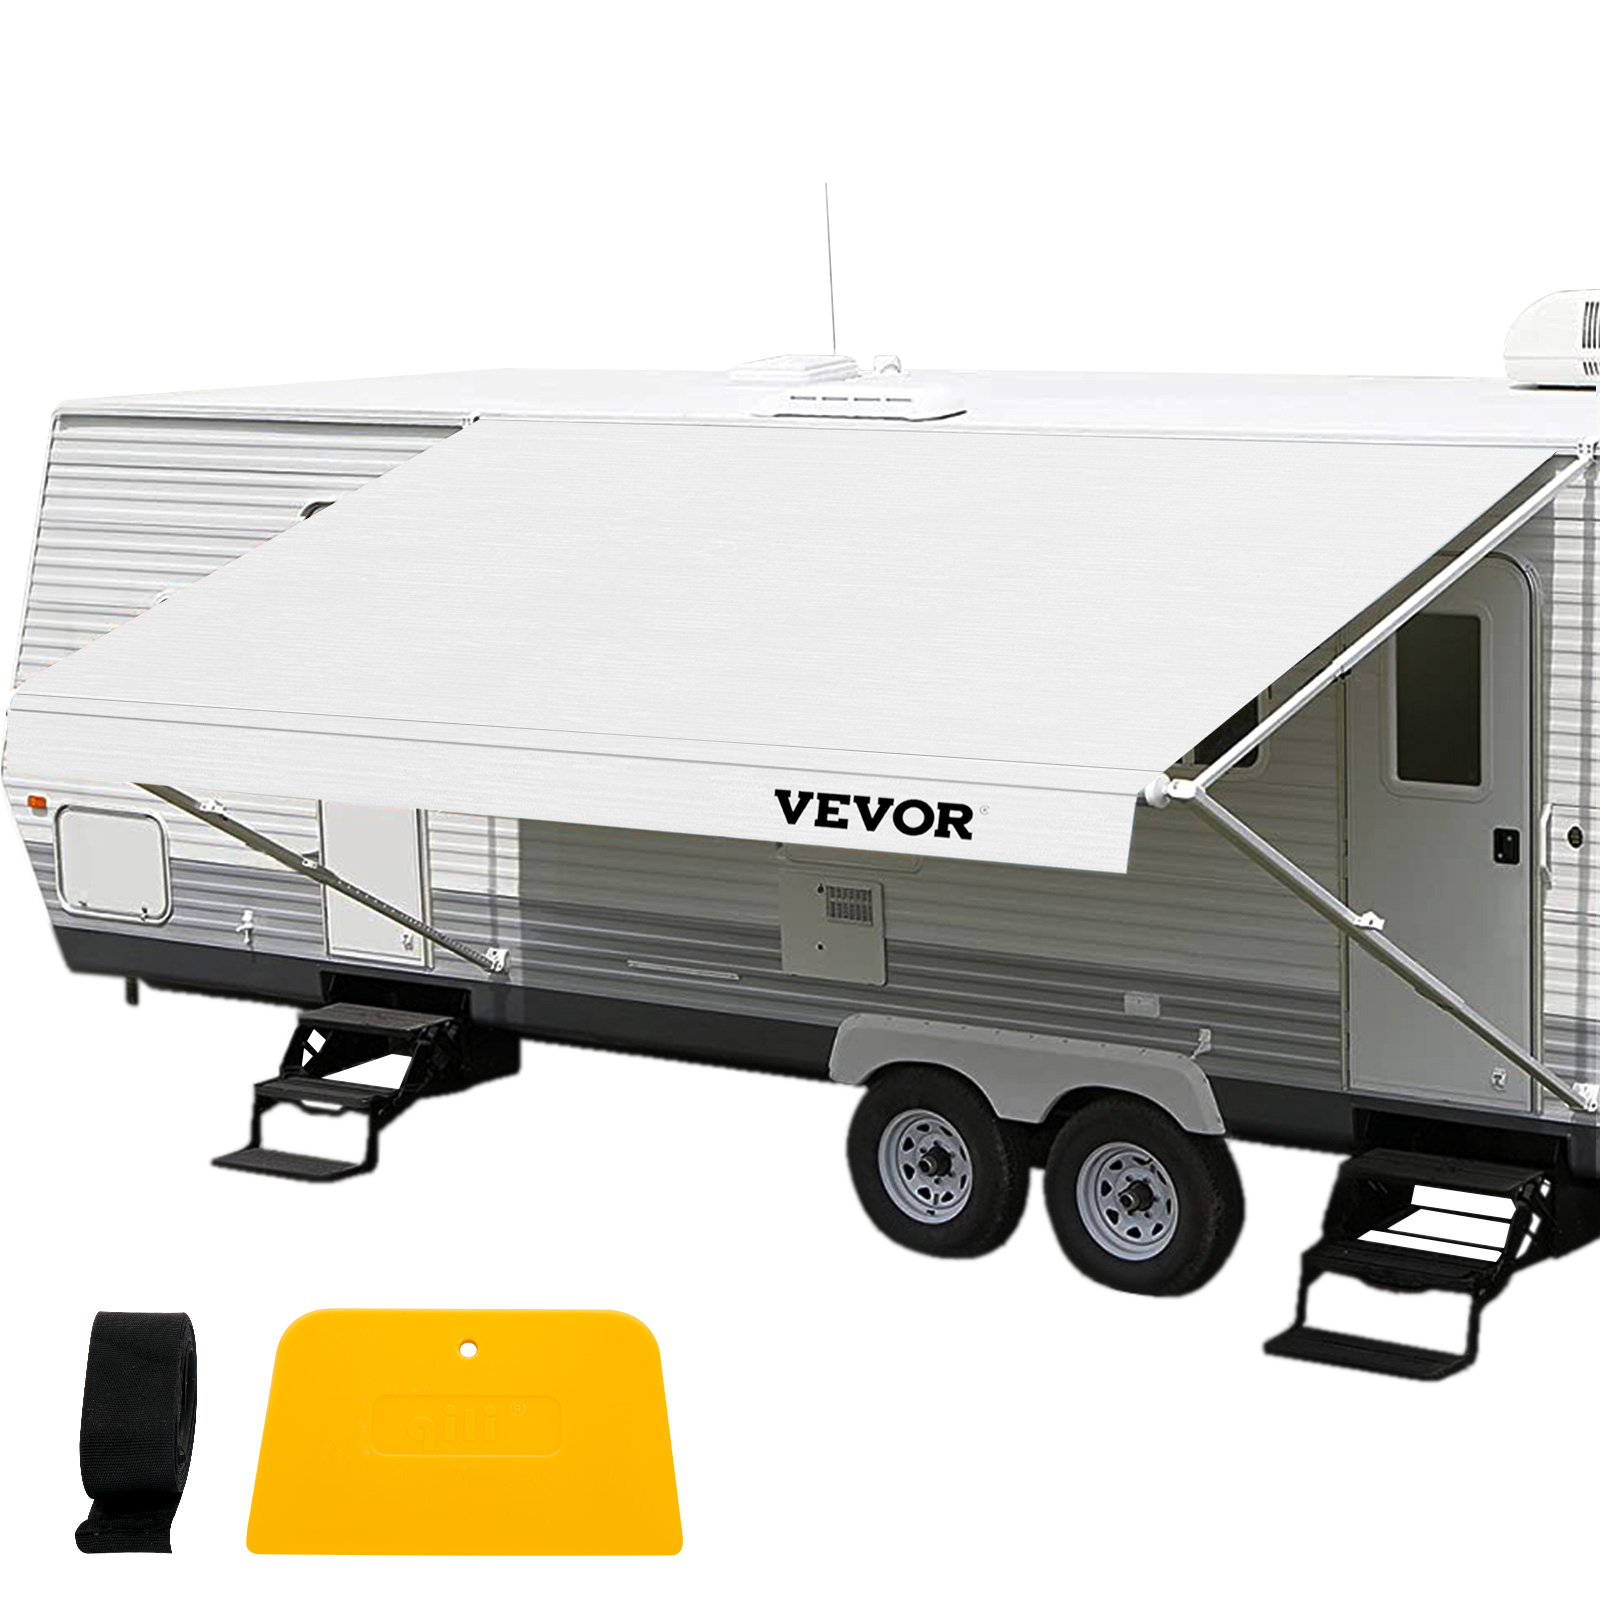 Vevor Rv Awning Replacement Fabric 14 Ft Rv Awining Camper Trailer White от Vevor Many GEOs